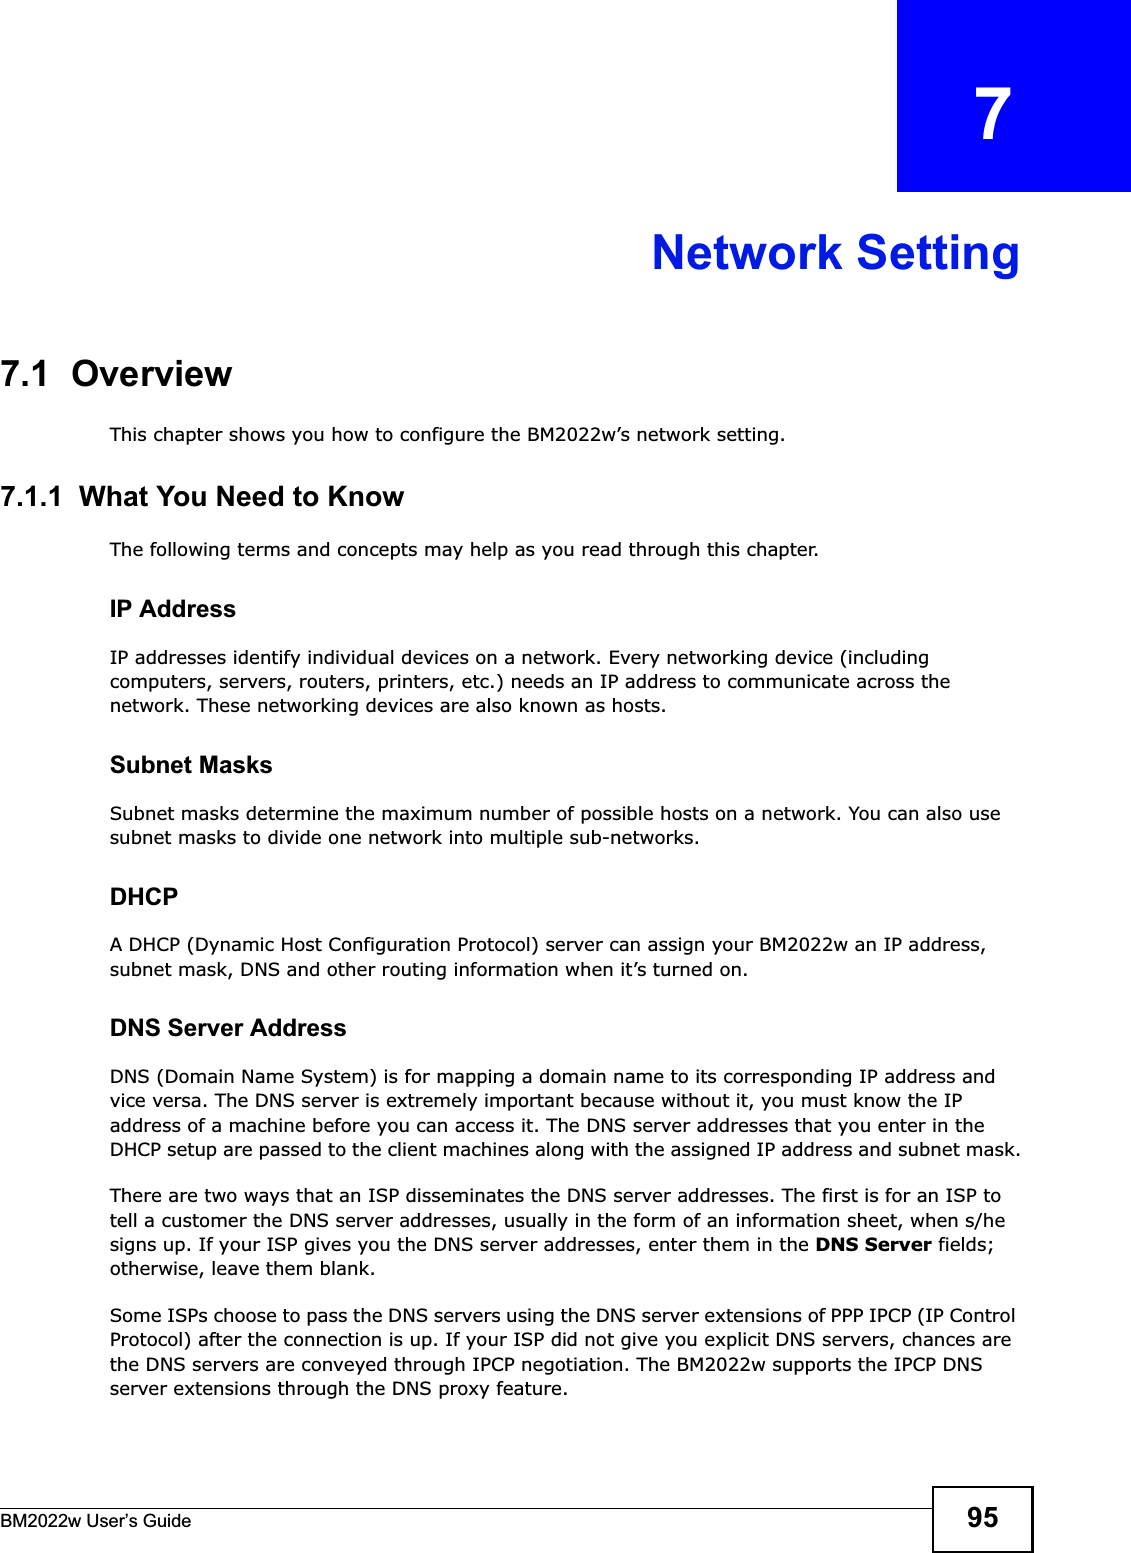 BM2022w User’s Guide 95CHAPTER   7Network Setting7.1  OverviewThis chapter shows you how to configure the BM2022w’s network setting.7.1.1  What You Need to KnowThe following terms and concepts may help as you read through this chapter.IP AddressIP addresses identify individual devices on a network. Every networking device (including computers, servers, routers, printers, etc.) needs an IP address to communicate across the network. These networking devices are also known as hosts.Subnet MasksSubnet masks determine the maximum number of possible hosts on a network. You can also use subnet masks to divide one network into multiple sub-networks.DHCPA DHCP (Dynamic Host Configuration Protocol) server can assign your BM2022w an IP address, subnet mask, DNS and other routing information when it’s turned on.DNS Server AddressDNS (Domain Name System) is for mapping a domain name to its corresponding IP address and vice versa. The DNS server is extremely important because without it, you must know the IP address of a machine before you can access it. The DNS server addresses that you enter in the DHCP setup are passed to the client machines along with the assigned IP address and subnet mask.There are two ways that an ISP disseminates the DNS server addresses. The first is for an ISP to tell a customer the DNS server addresses, usually in the form of an information sheet, when s/he signs up. If your ISP gives you the DNS server addresses, enter them in the DNS Server fields; otherwise, leave them blank.Some ISPs choose to pass the DNS servers using the DNS server extensions of PPP IPCP (IP Control Protocol) after the connection is up. If your ISP did not give you explicit DNS servers, chances are the DNS servers are conveyed through IPCP negotiation. The BM2022w supports the IPCP DNS server extensions through the DNS proxy feature.